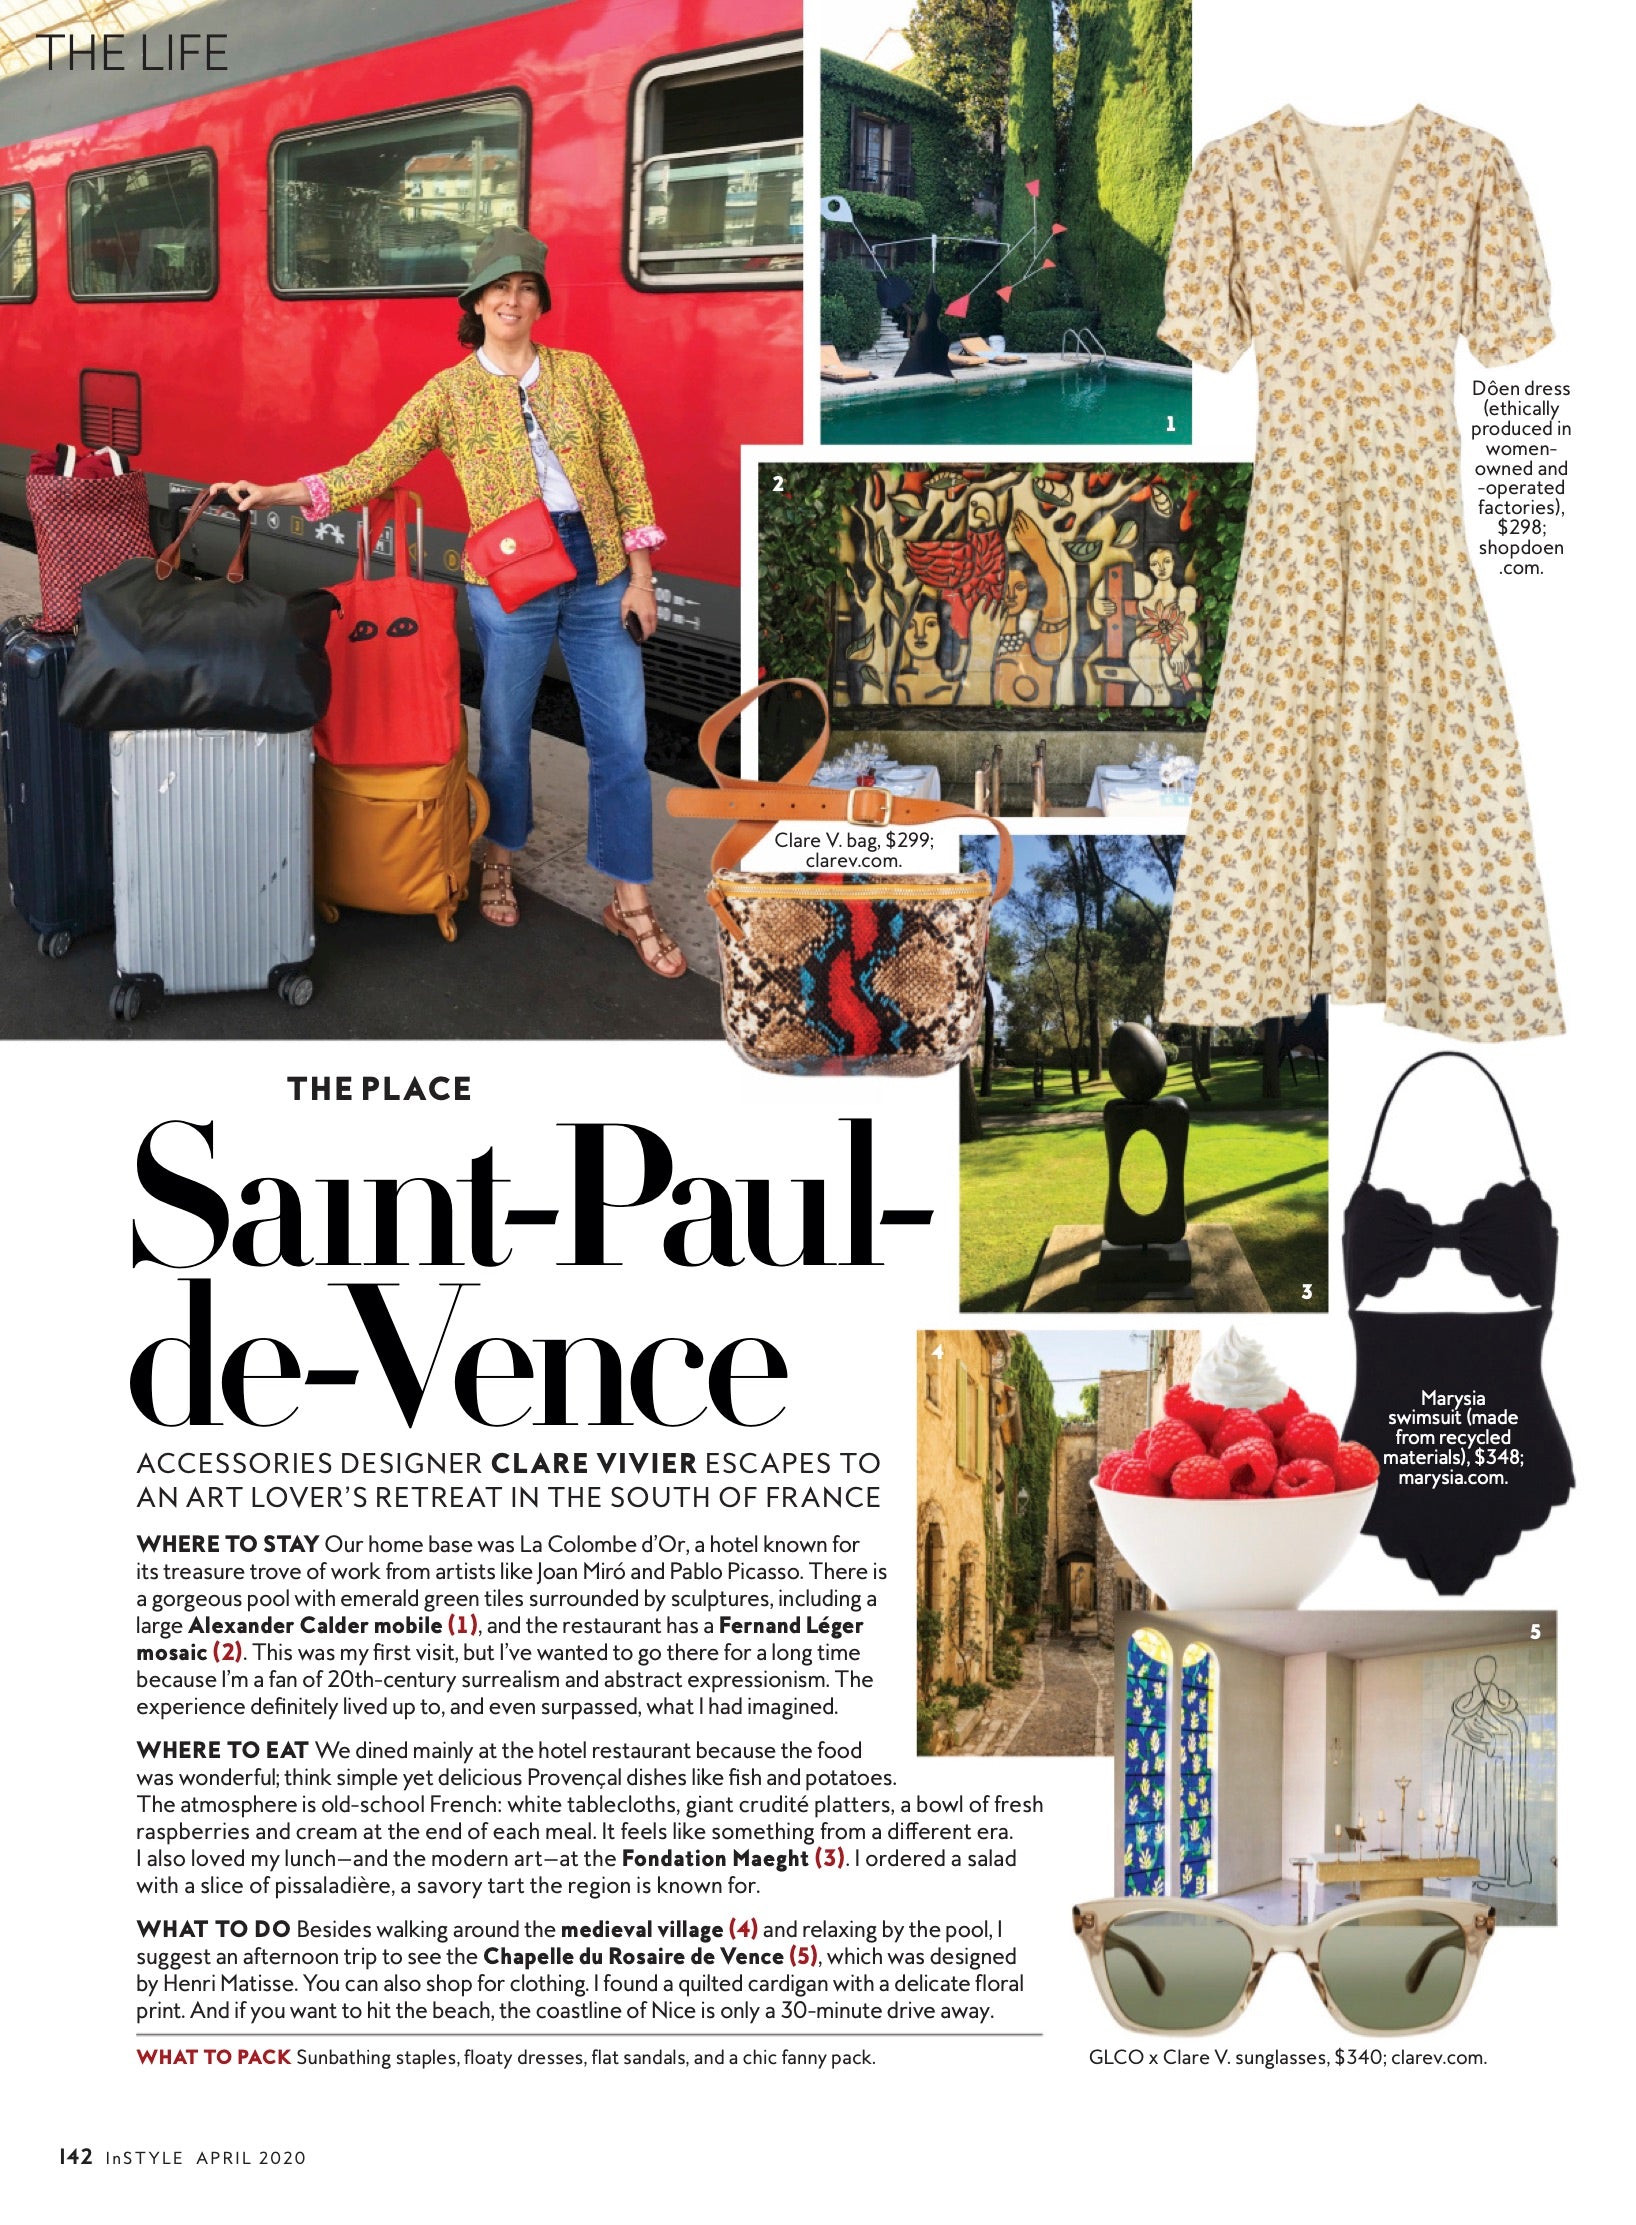 Snippet From InStyle's April 2020 Issue - Saint-Paul-de-Vence Story following Clare Vivier's Trip To The South of France